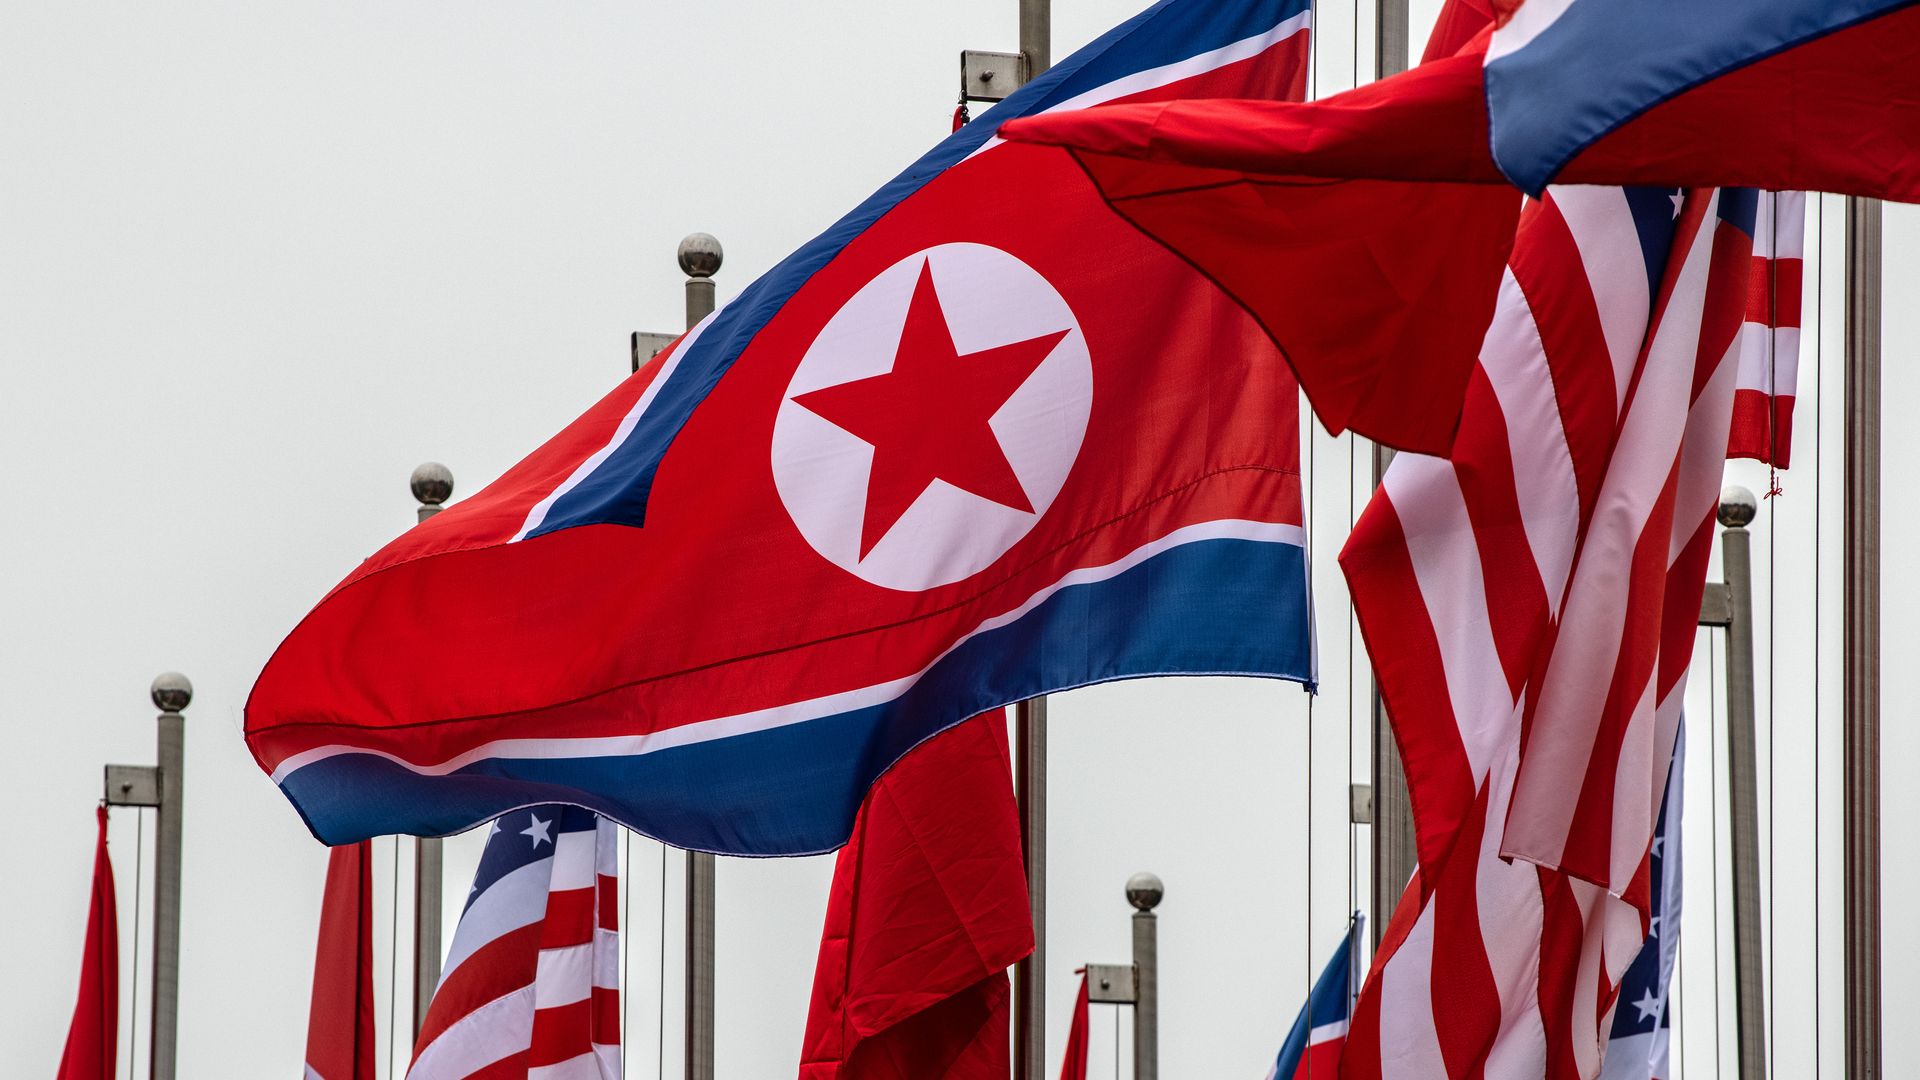 In this image, North Korean and US flags wave over each other